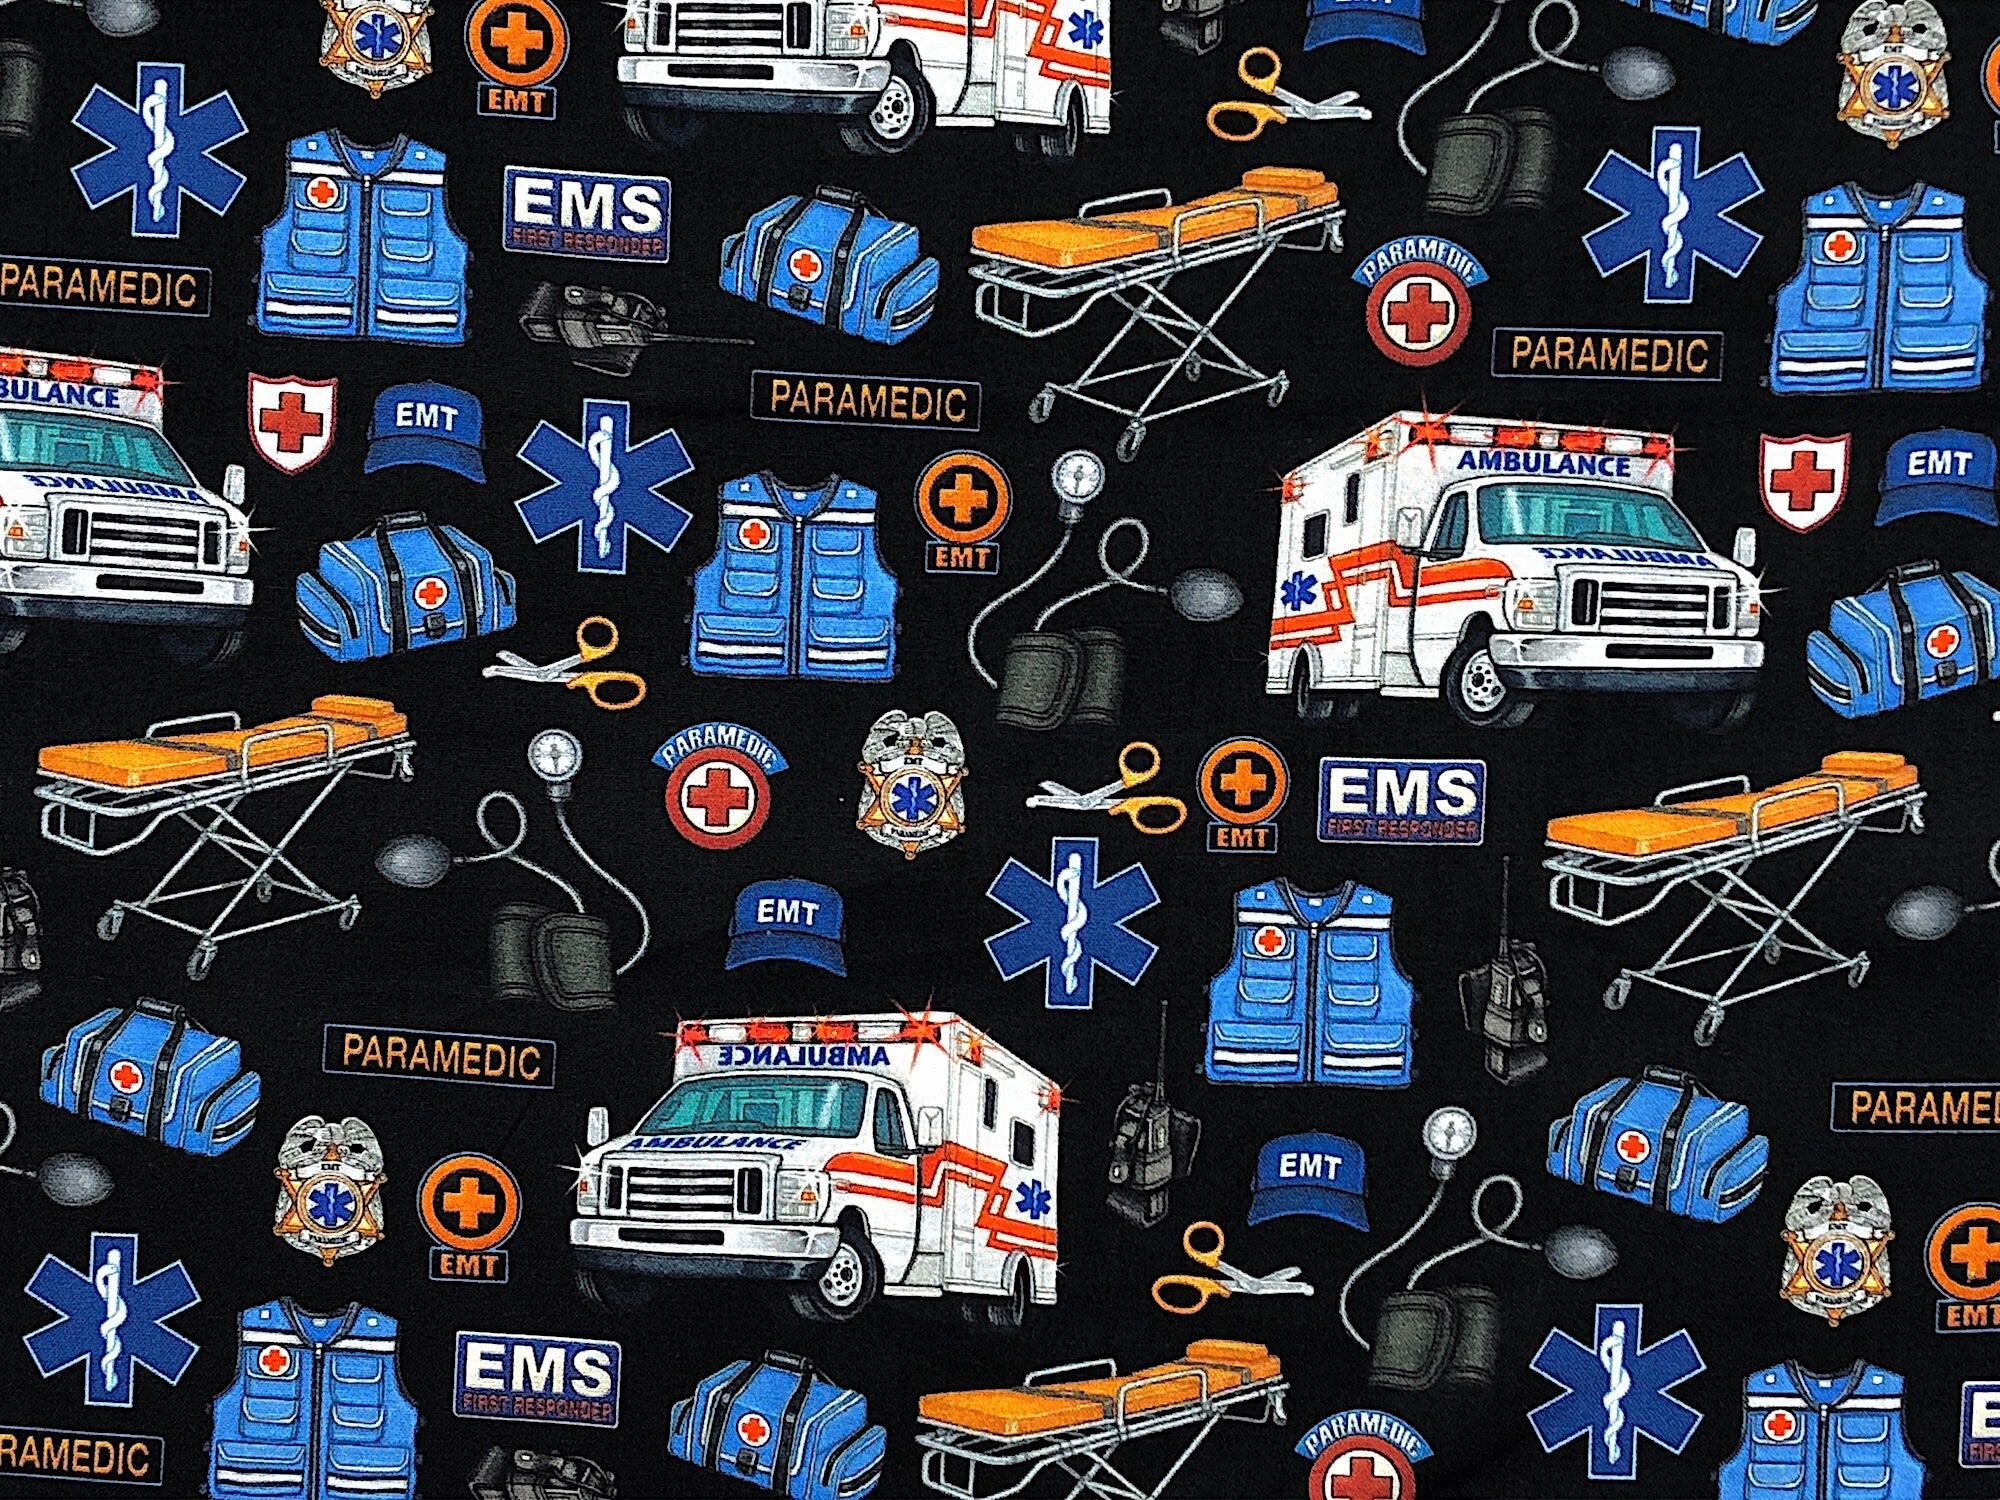 Black cotton fabric covered with ambulances, stretchers and paramedic equipment